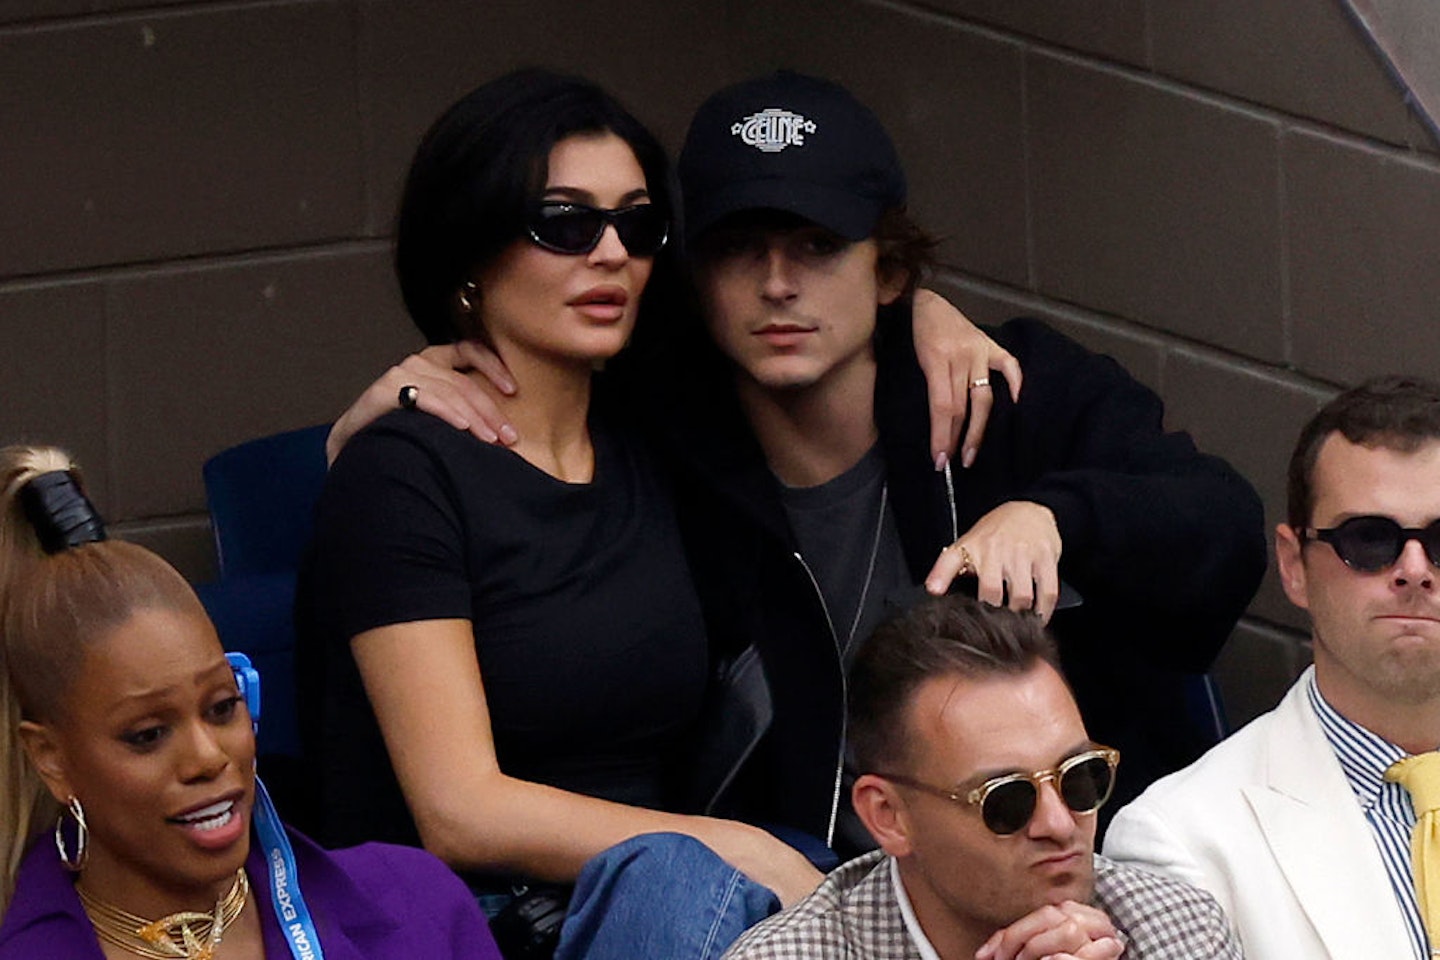 kylie jenner and timothy chalamet